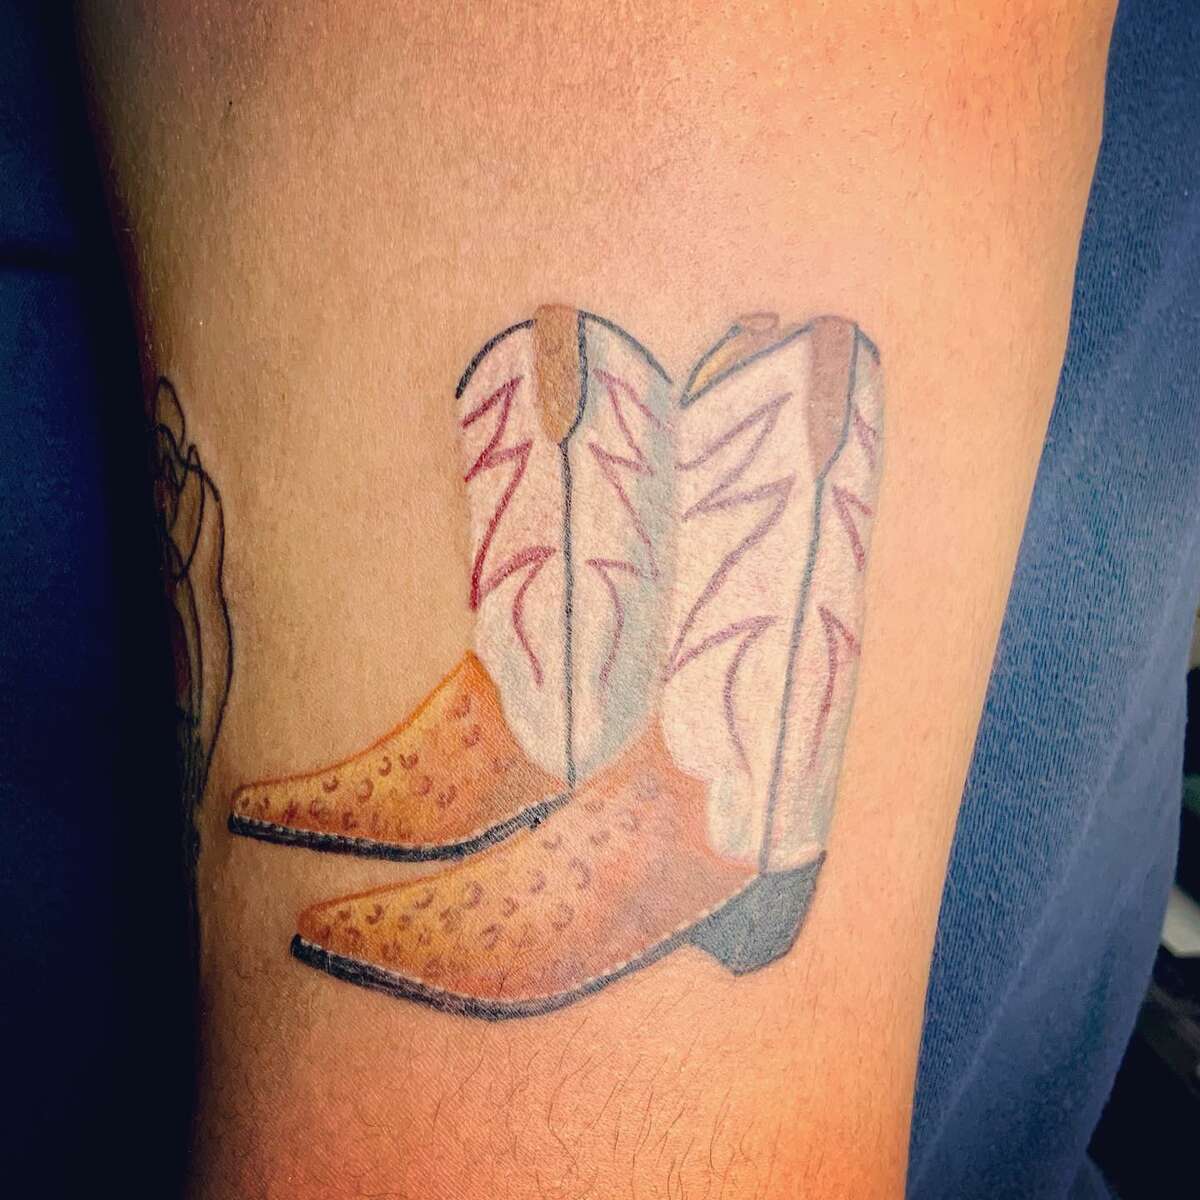 North Star Mall's pair of gigantic cowboy boots have a tiny, tattooed twin on the arm of a San Antonio woman.